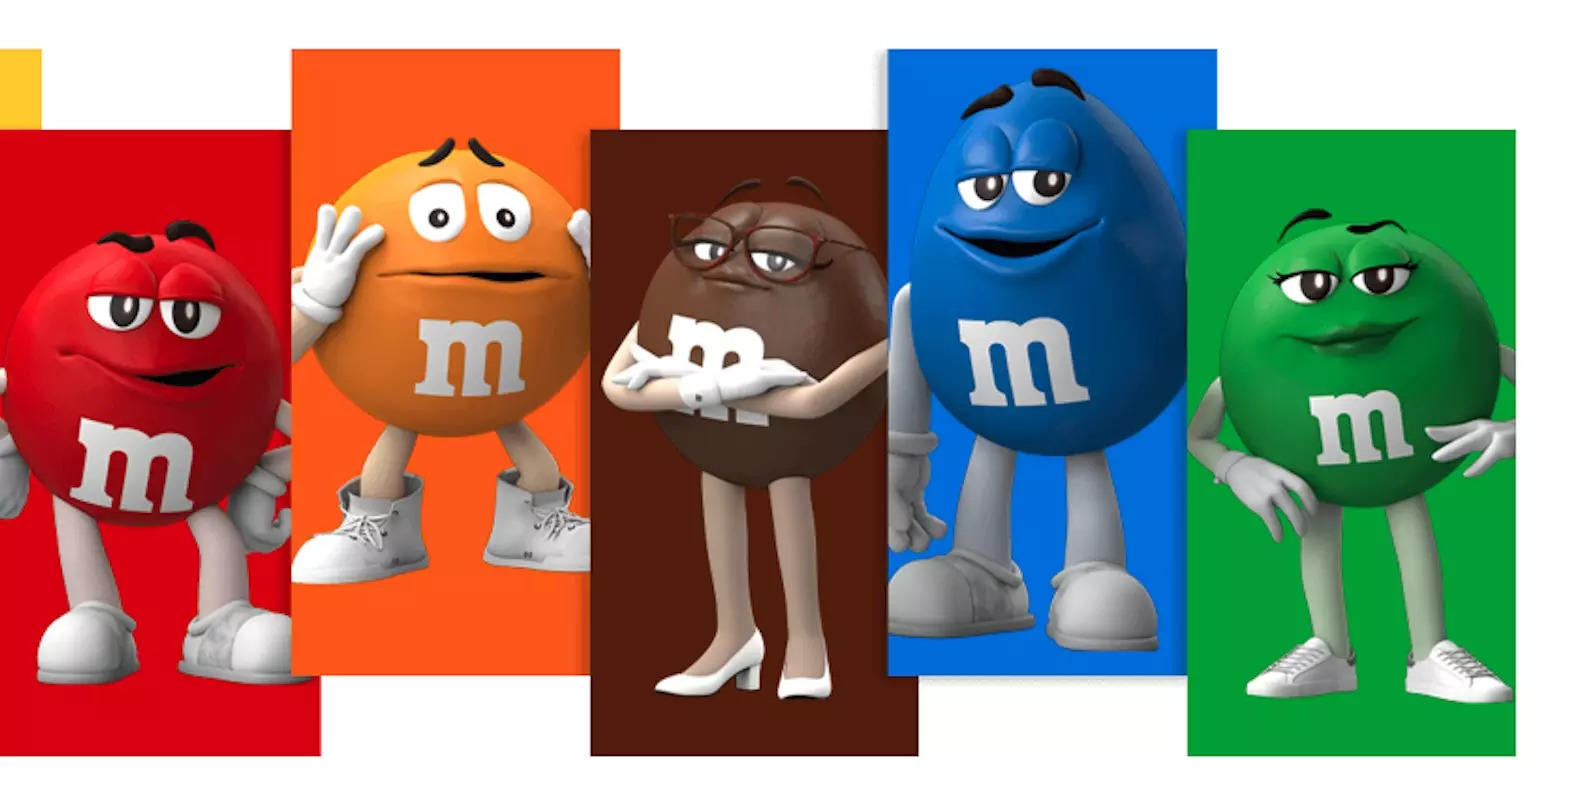 Why is the green M&M so seductive? A look back at the chocolate's sexist  history.